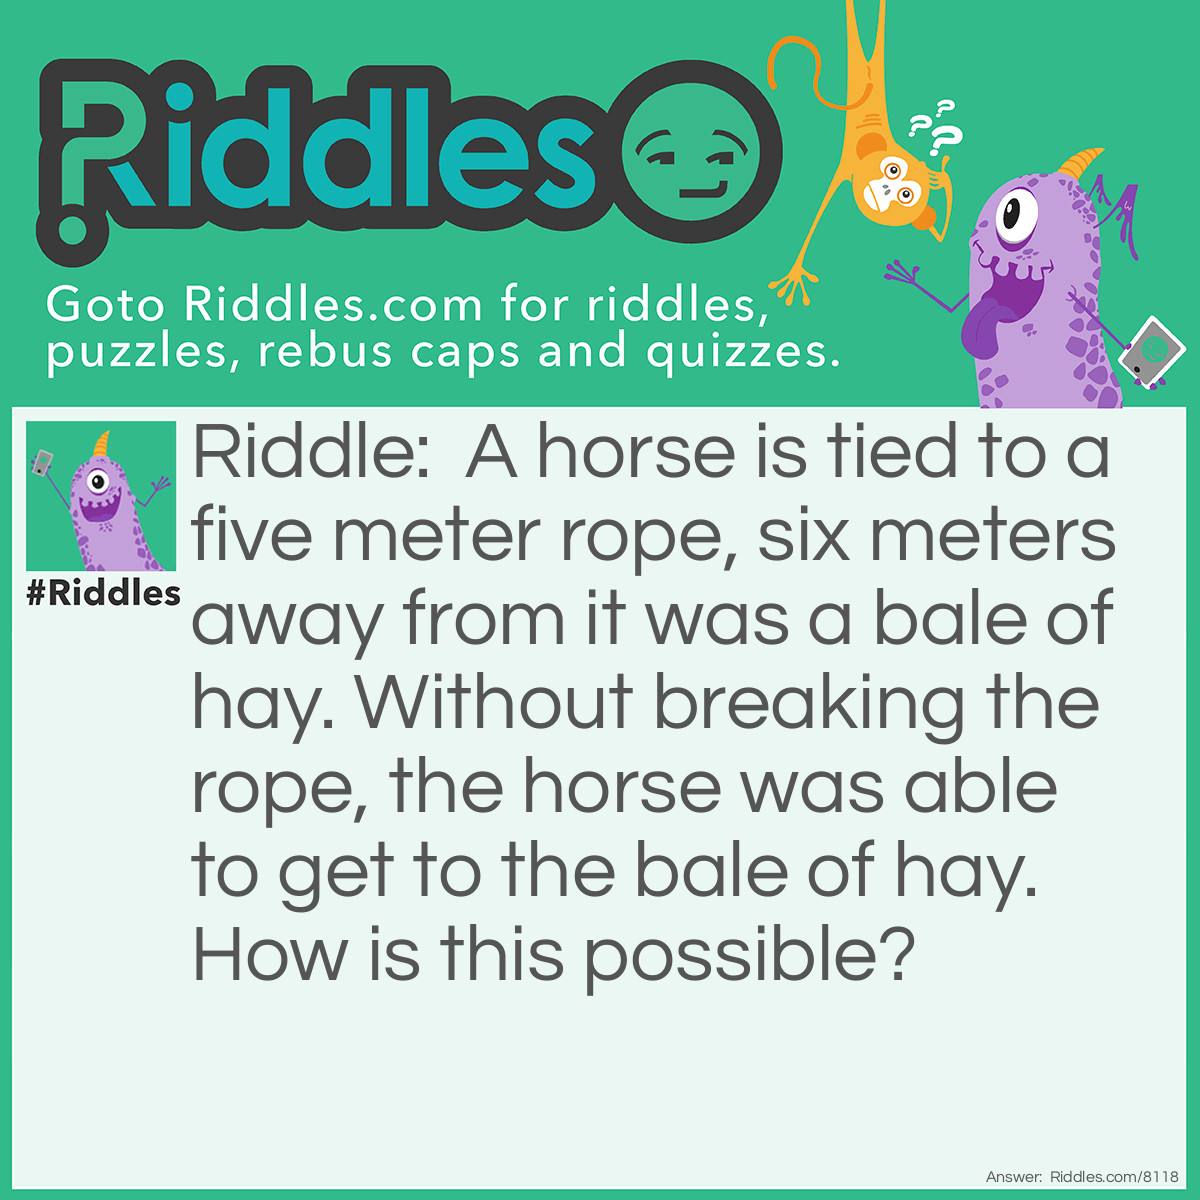 Riddle: A horse is tied to a five meter rope, six meters away from it was a bale of hay. Without breaking the rope, the horse was able to get to the bale of hay. How is this possible? Answer: The other end of the rope was tied to nothing